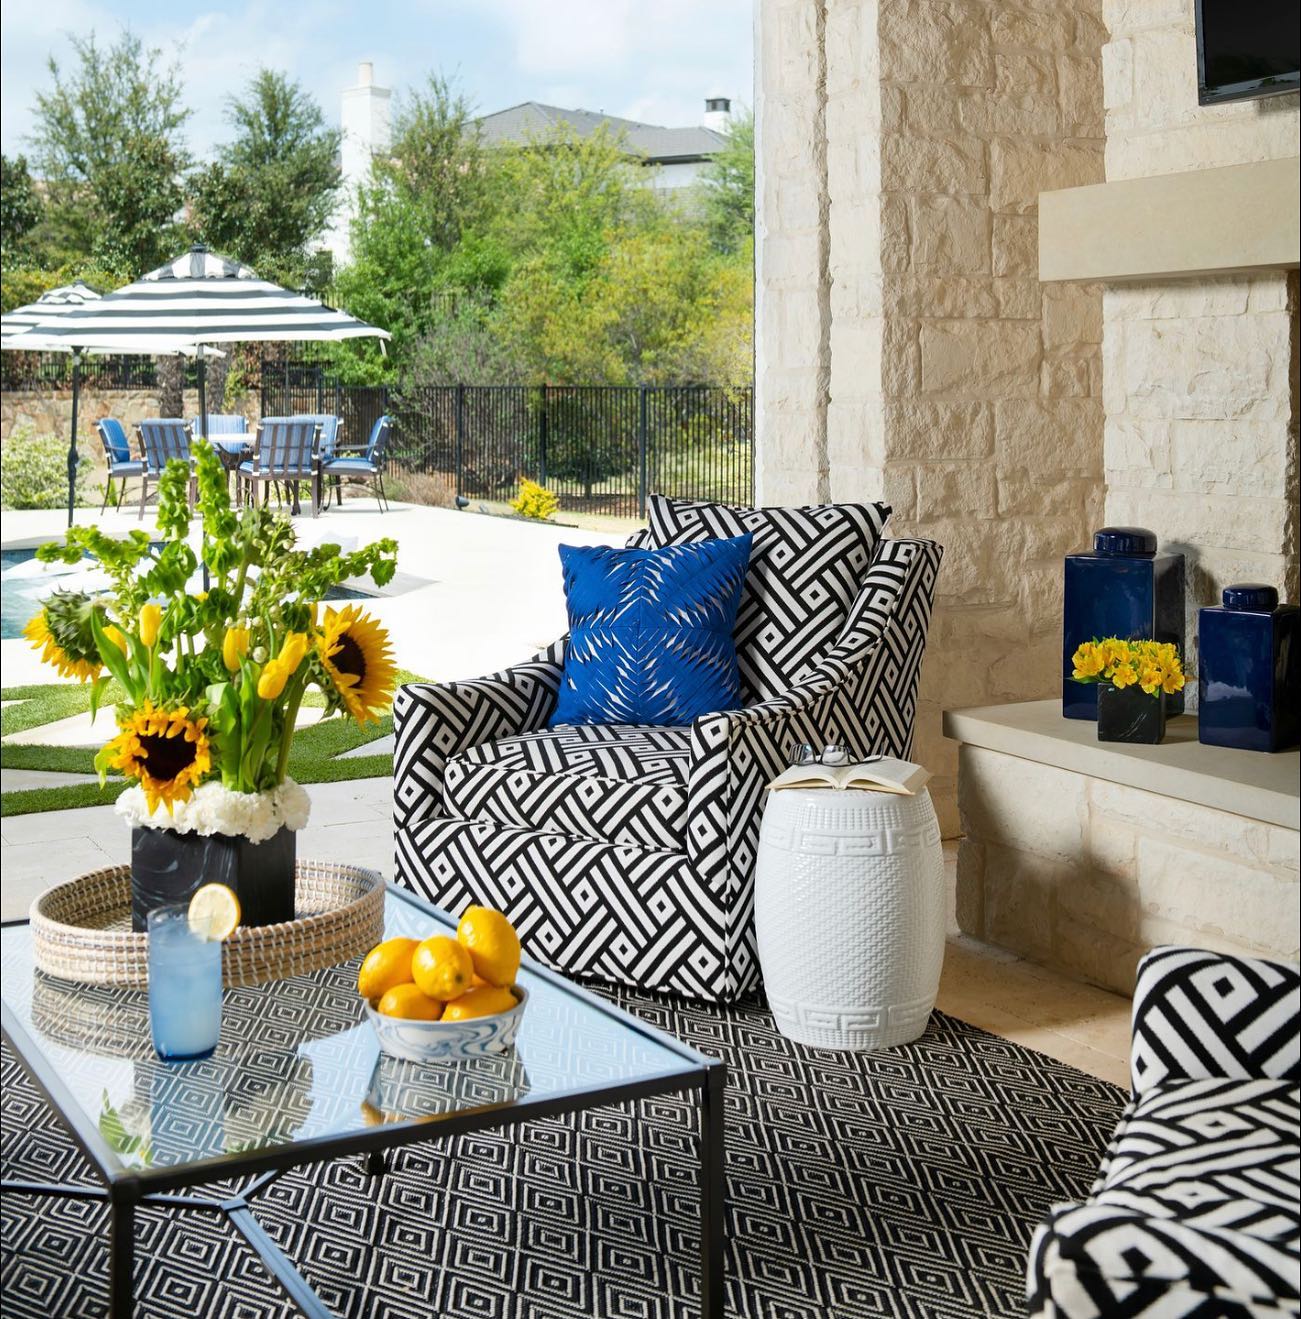 When your #interiordesign blends seamlessly with your #exteriordesign. We’re here for it!! 🖤💙 All outdoor furnishings available thru our store in #Frisco. #outdoorliving #beigeisboring #designerfurnishings #getthelook #teamIBB #poolside #alfresco #resortliving #backyardparadise #backyarddesign #ibbdesign